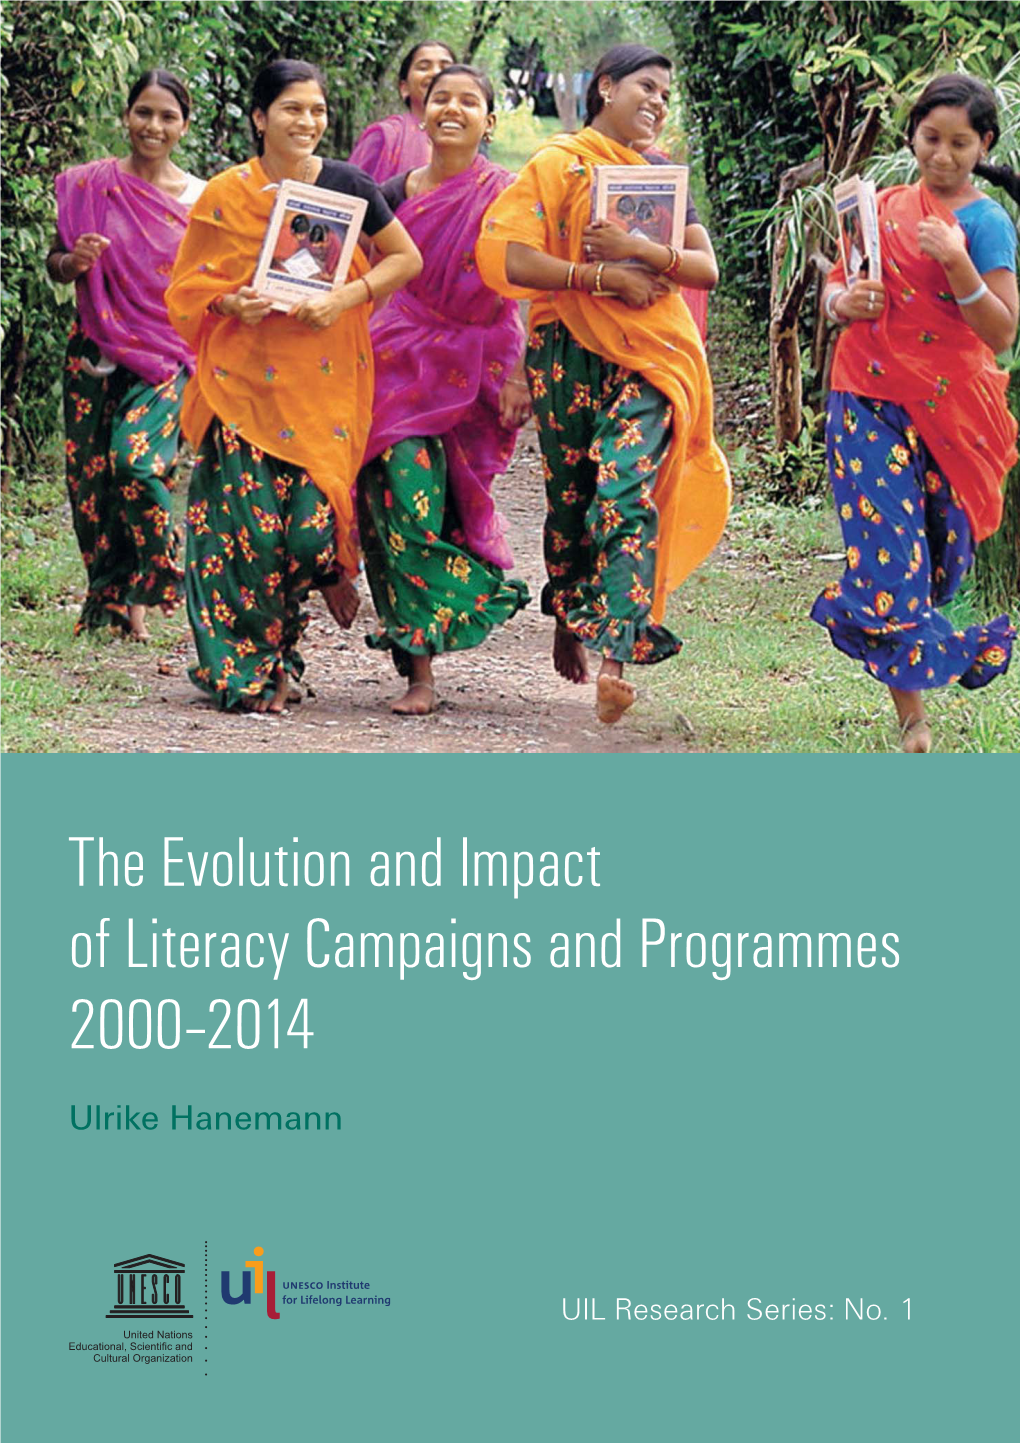 The Evolution and Impact of Literacy Campaigns and Programmes, 2000